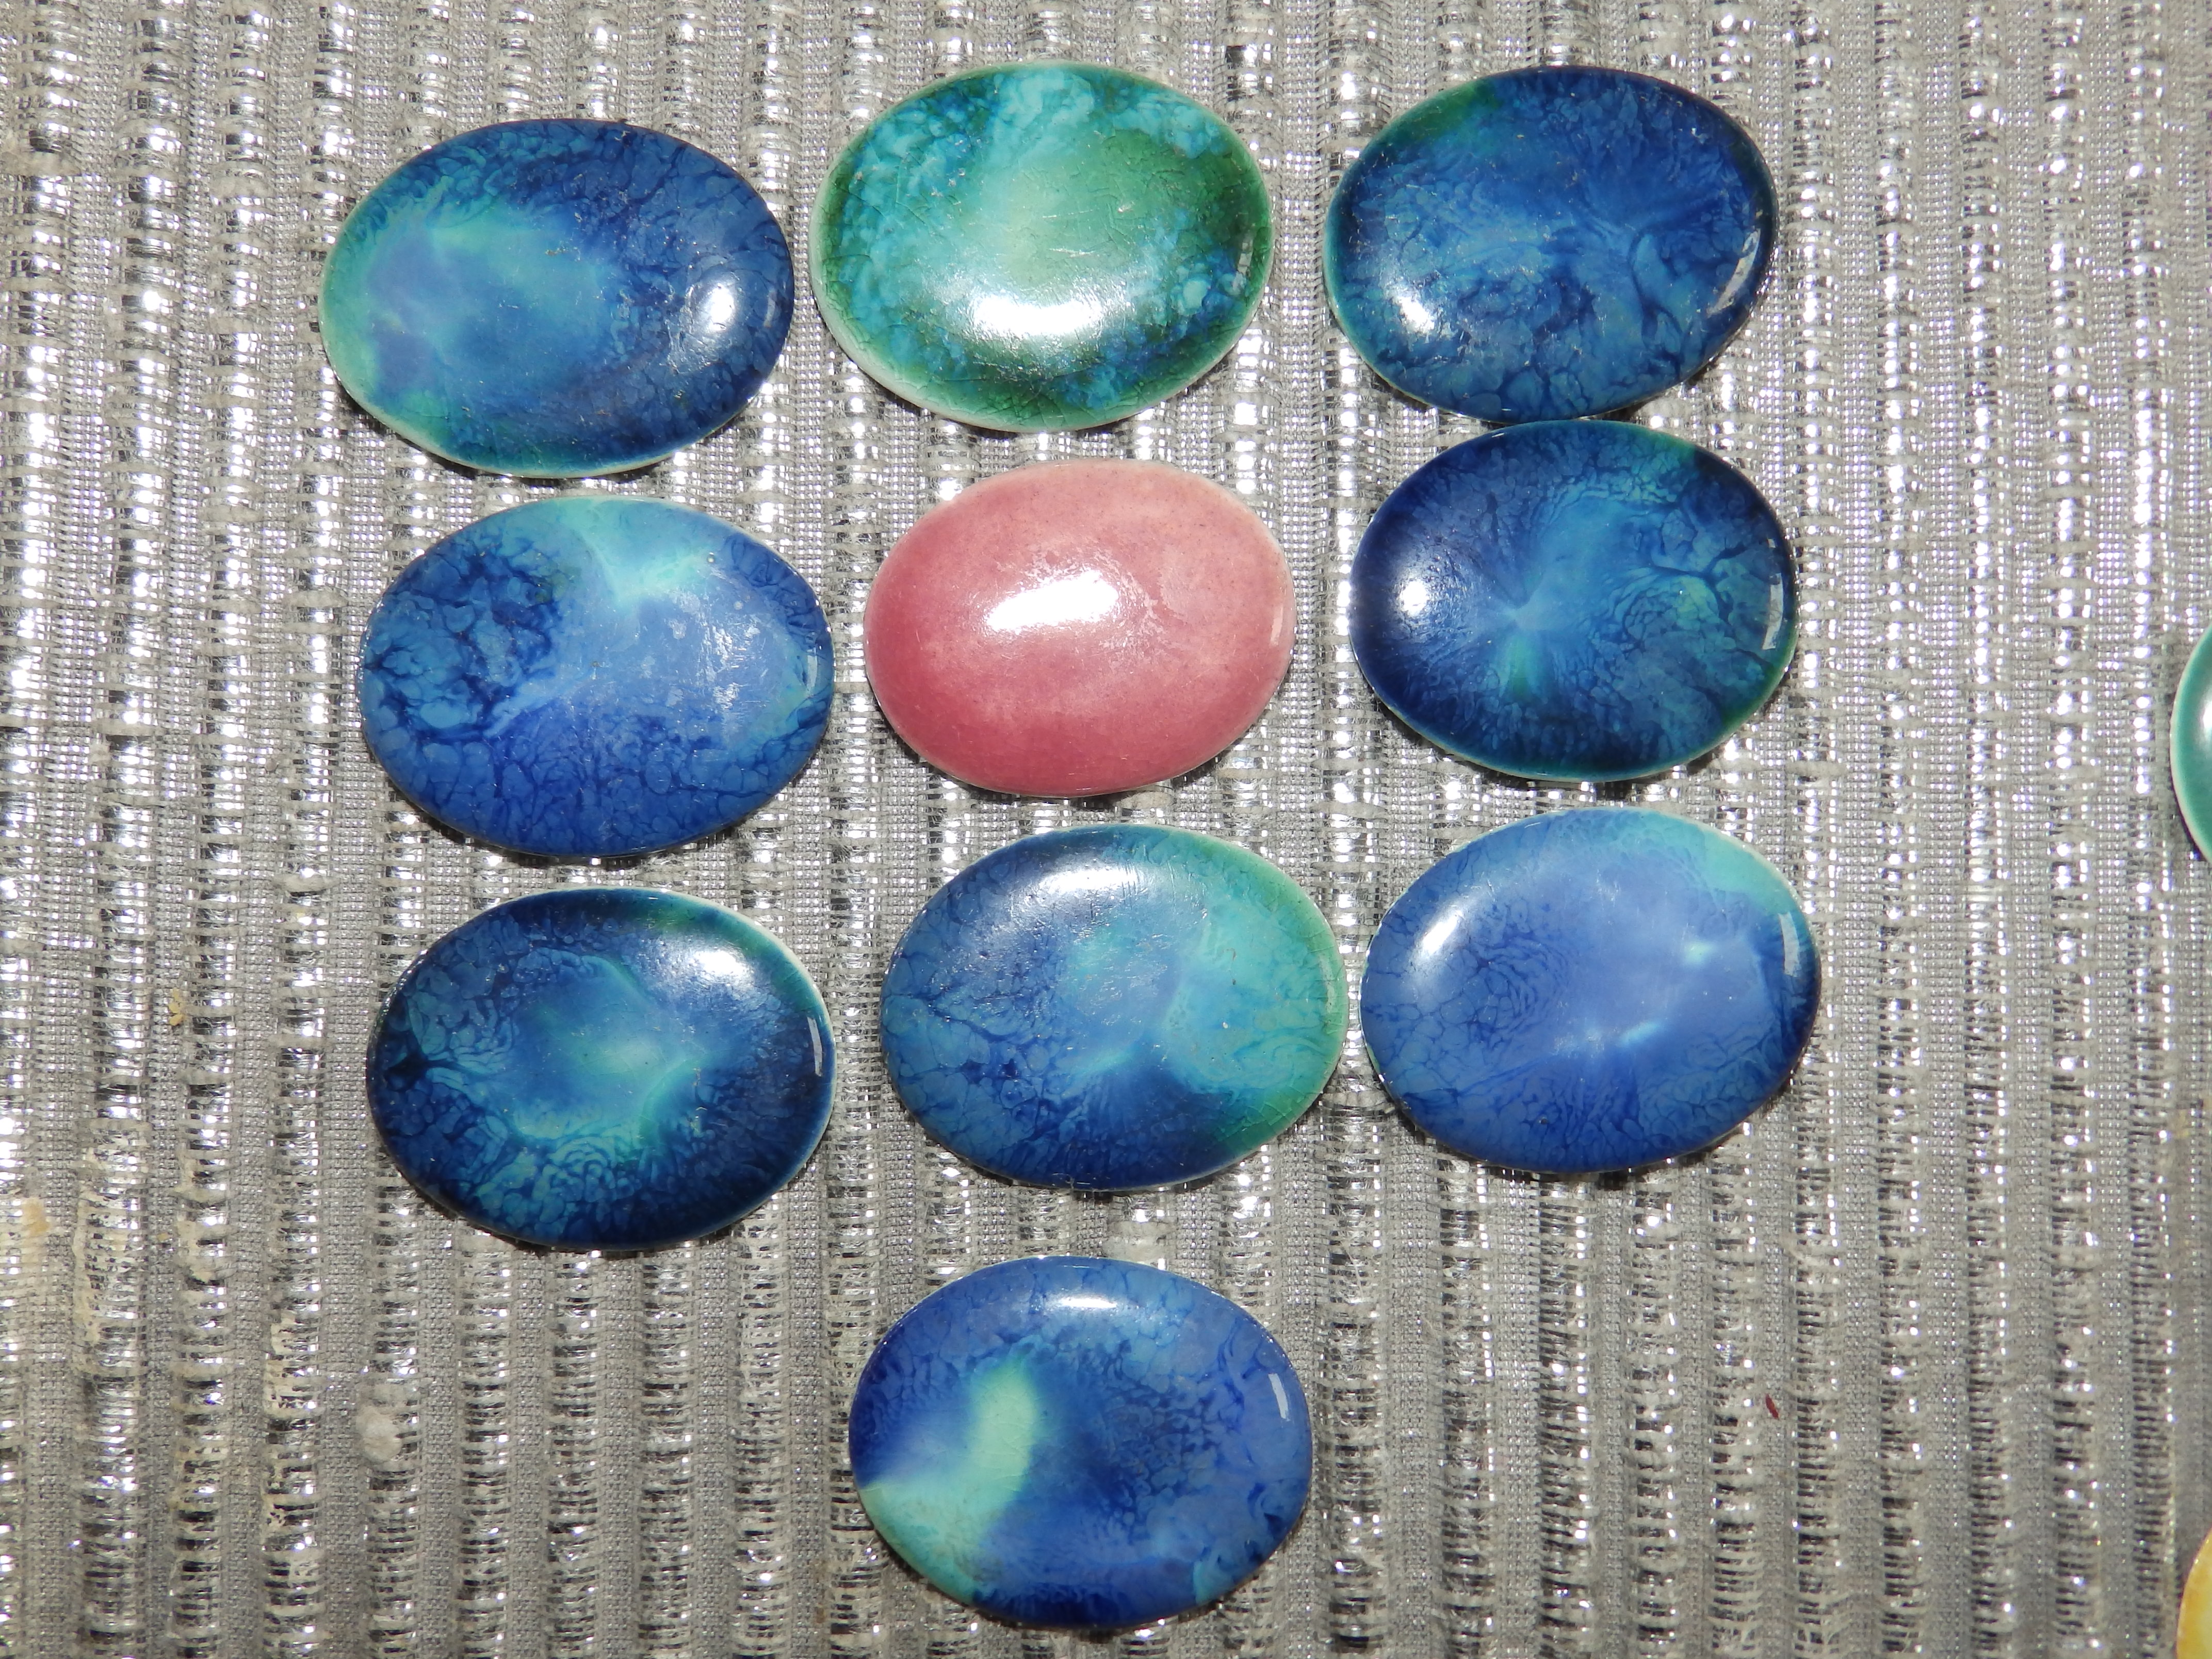 10 Ruskin oval cabochon plaques – approximately 1.5”